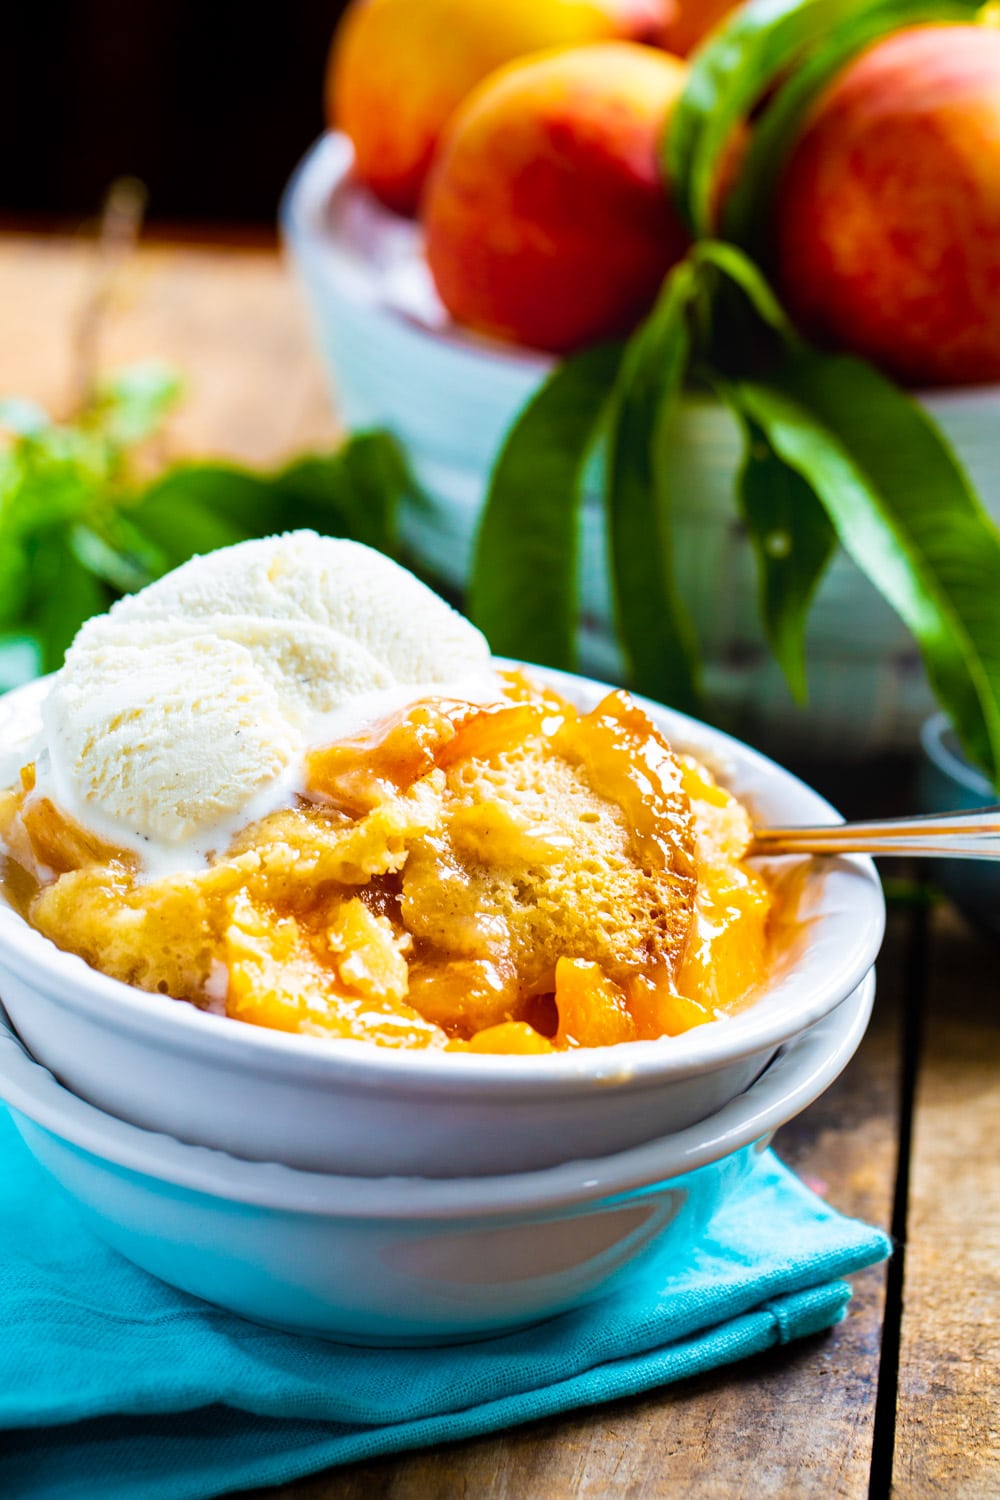 Peach Cobbler in bowl with ice cream. Bowl of peaches in background.